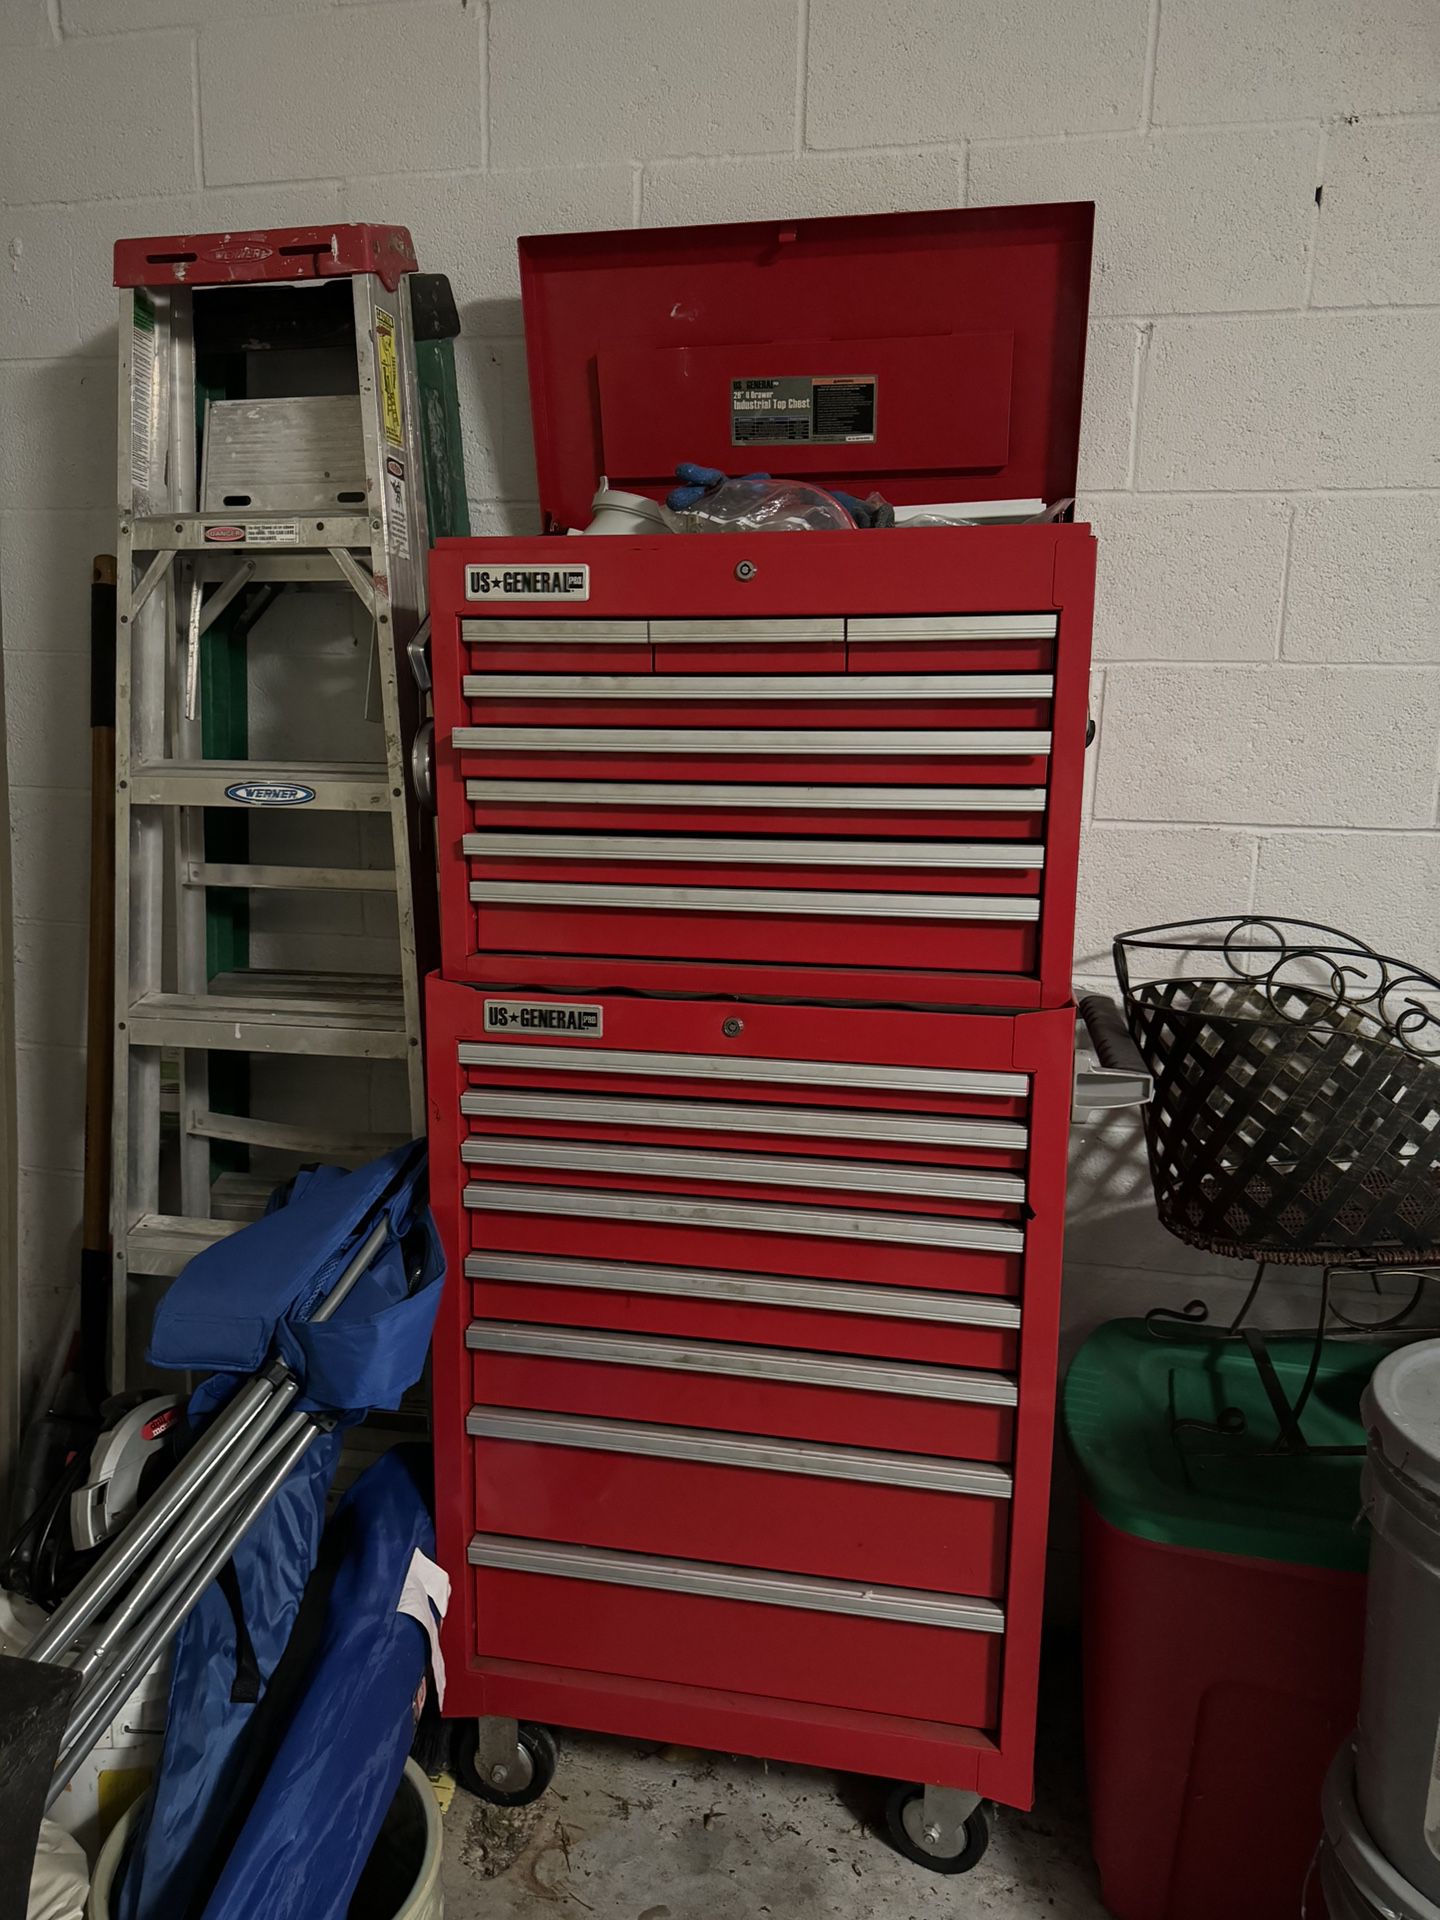 Tool Chest “U.S. GENERAL”